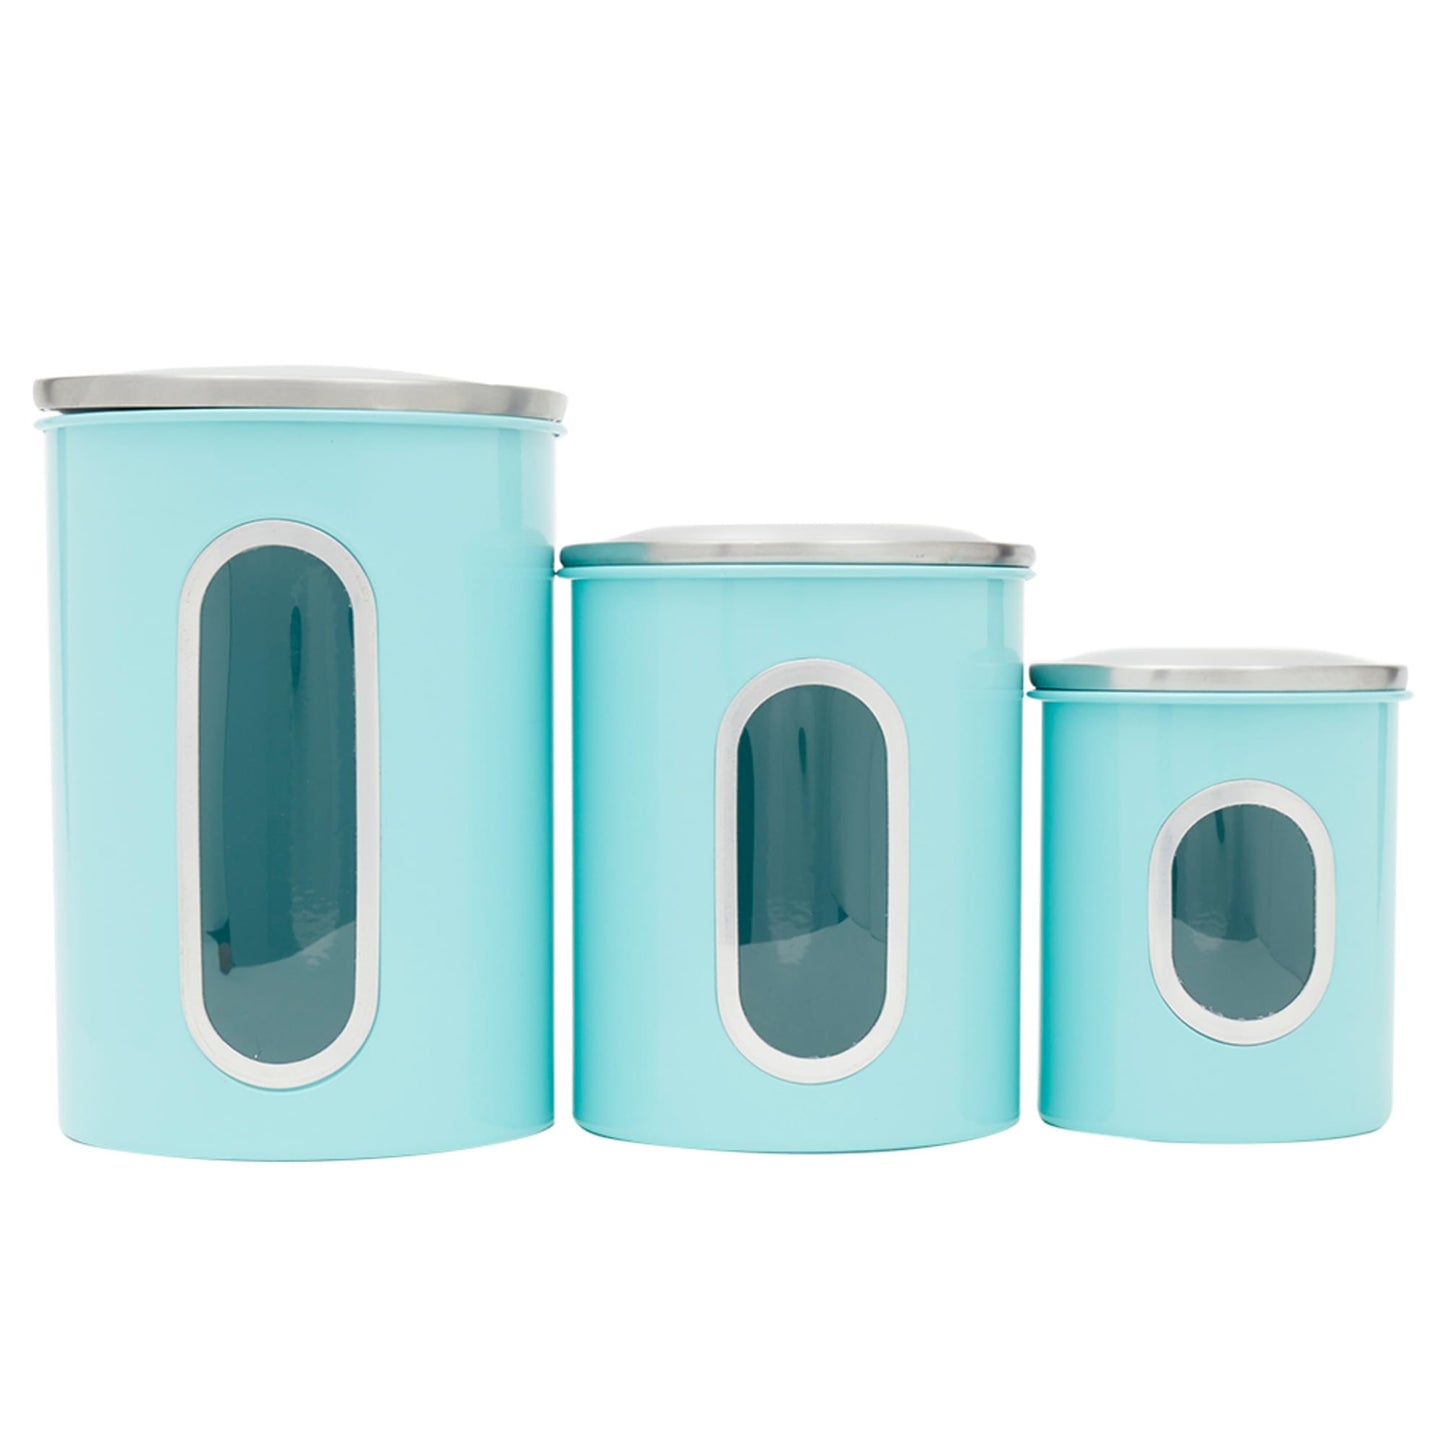 3 Piece Stainless Steel Top Canisters with Windows, Turquoise